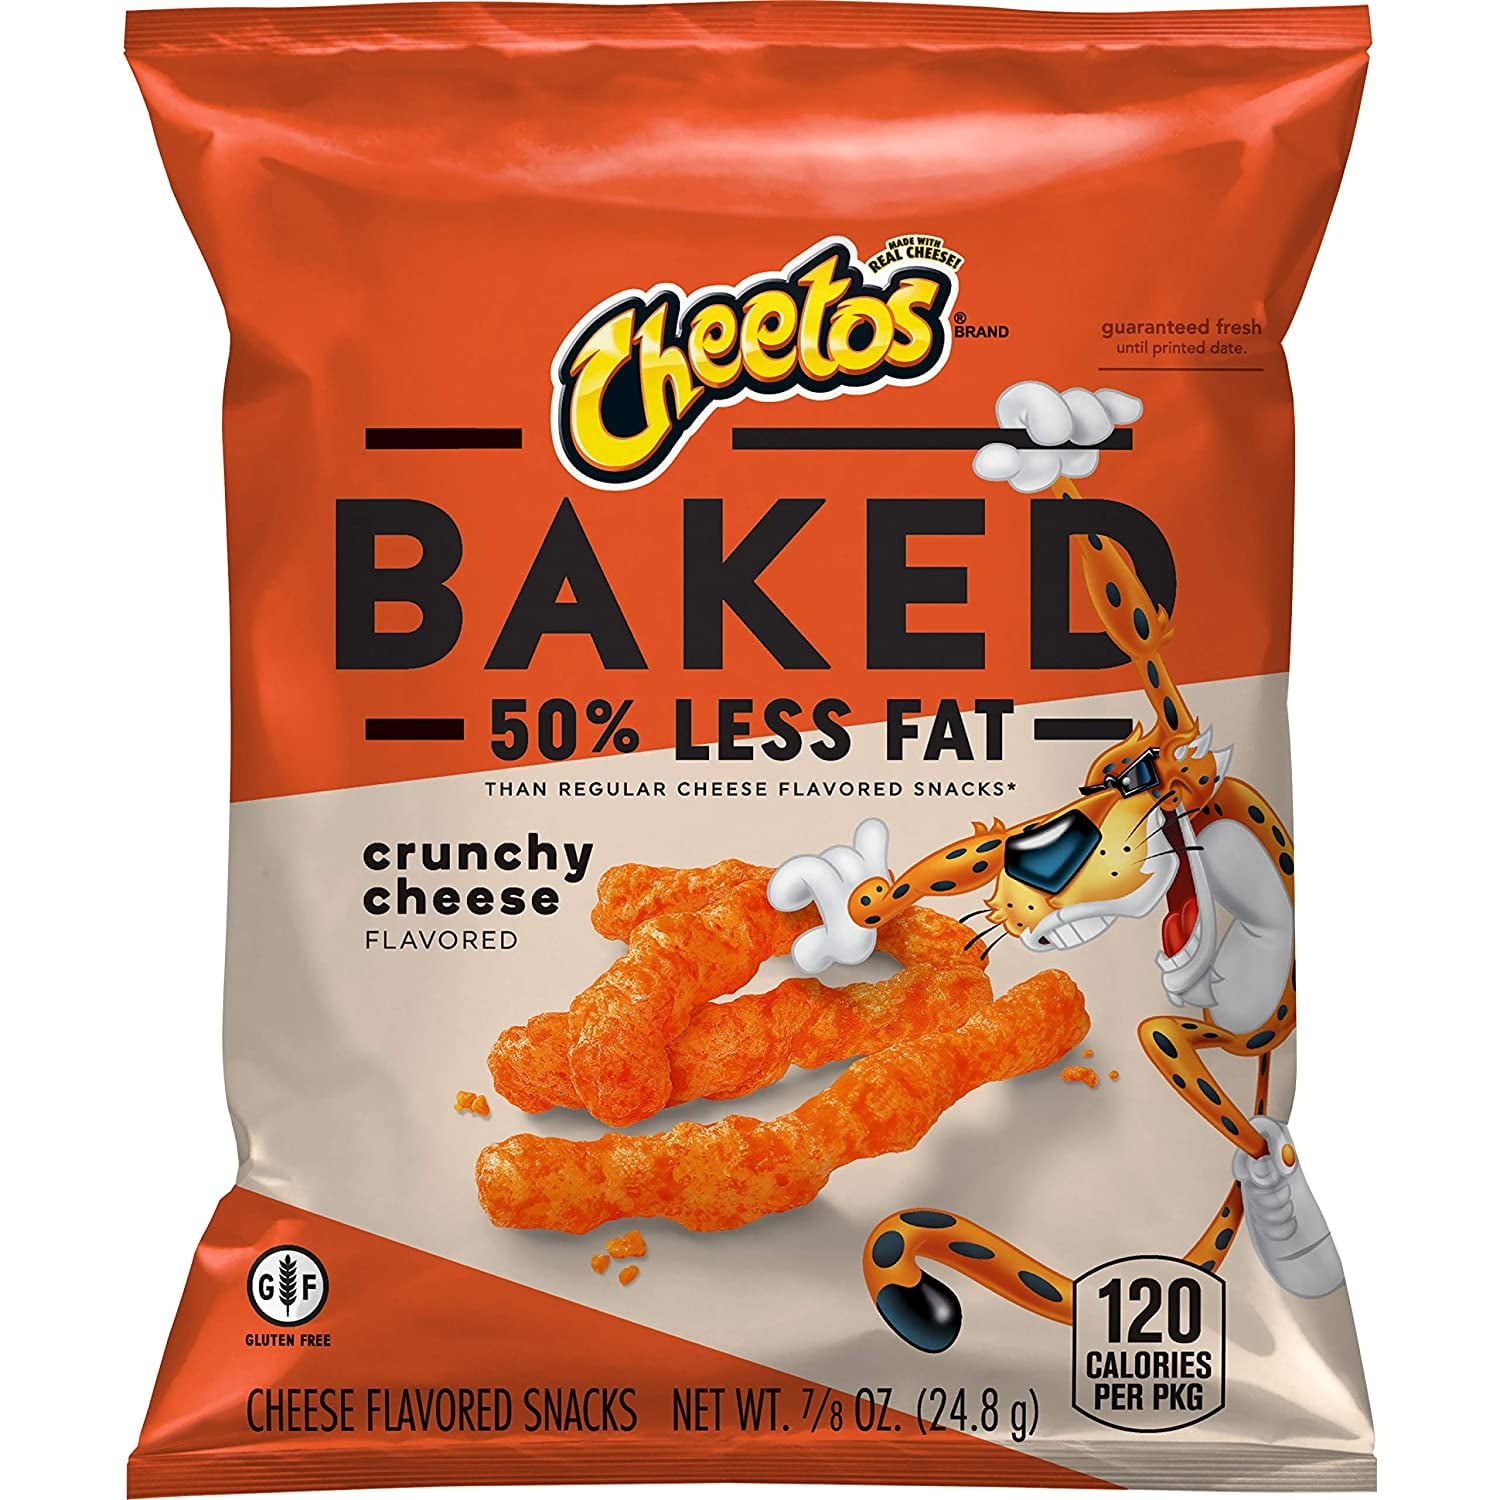 40-Pack 0.875-oz Cheetos Puffs Cheese Flavored Snacks $12.90 w